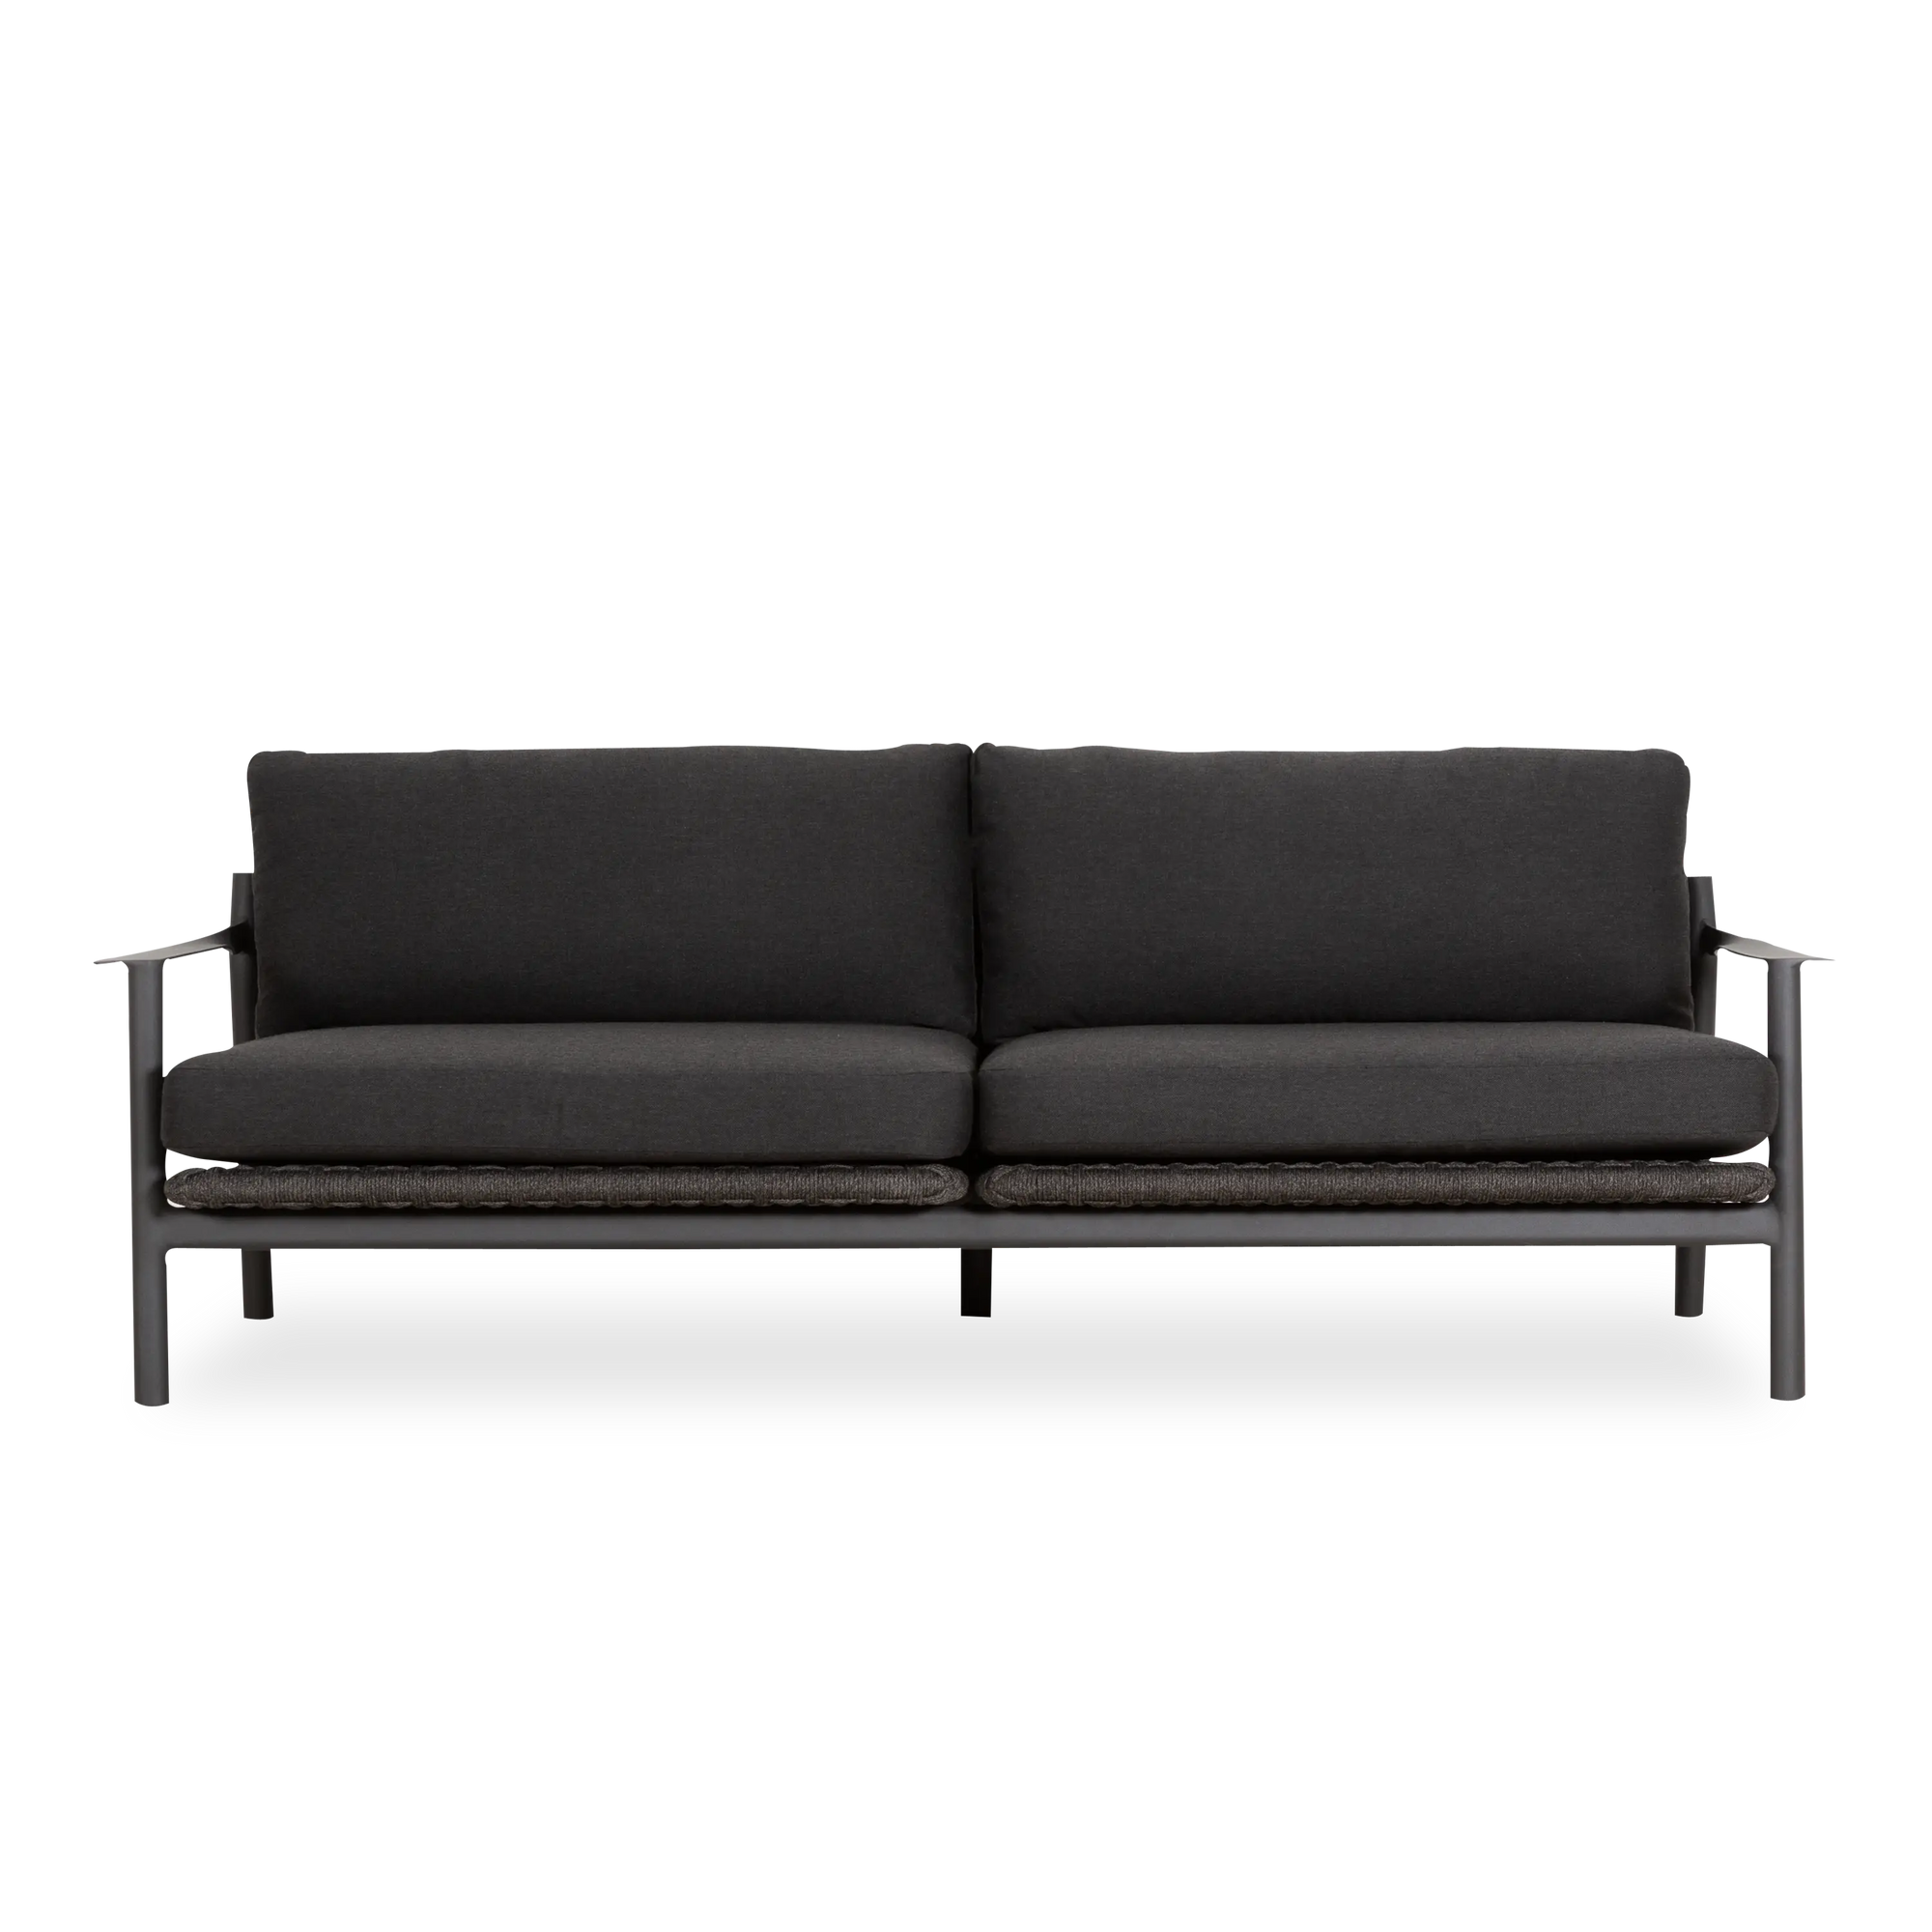 Designer Ann Marie Vering's Oliver Sofa is effortlessly good looking from every angle, a study in balance, counterbalance, and perfect proportions.